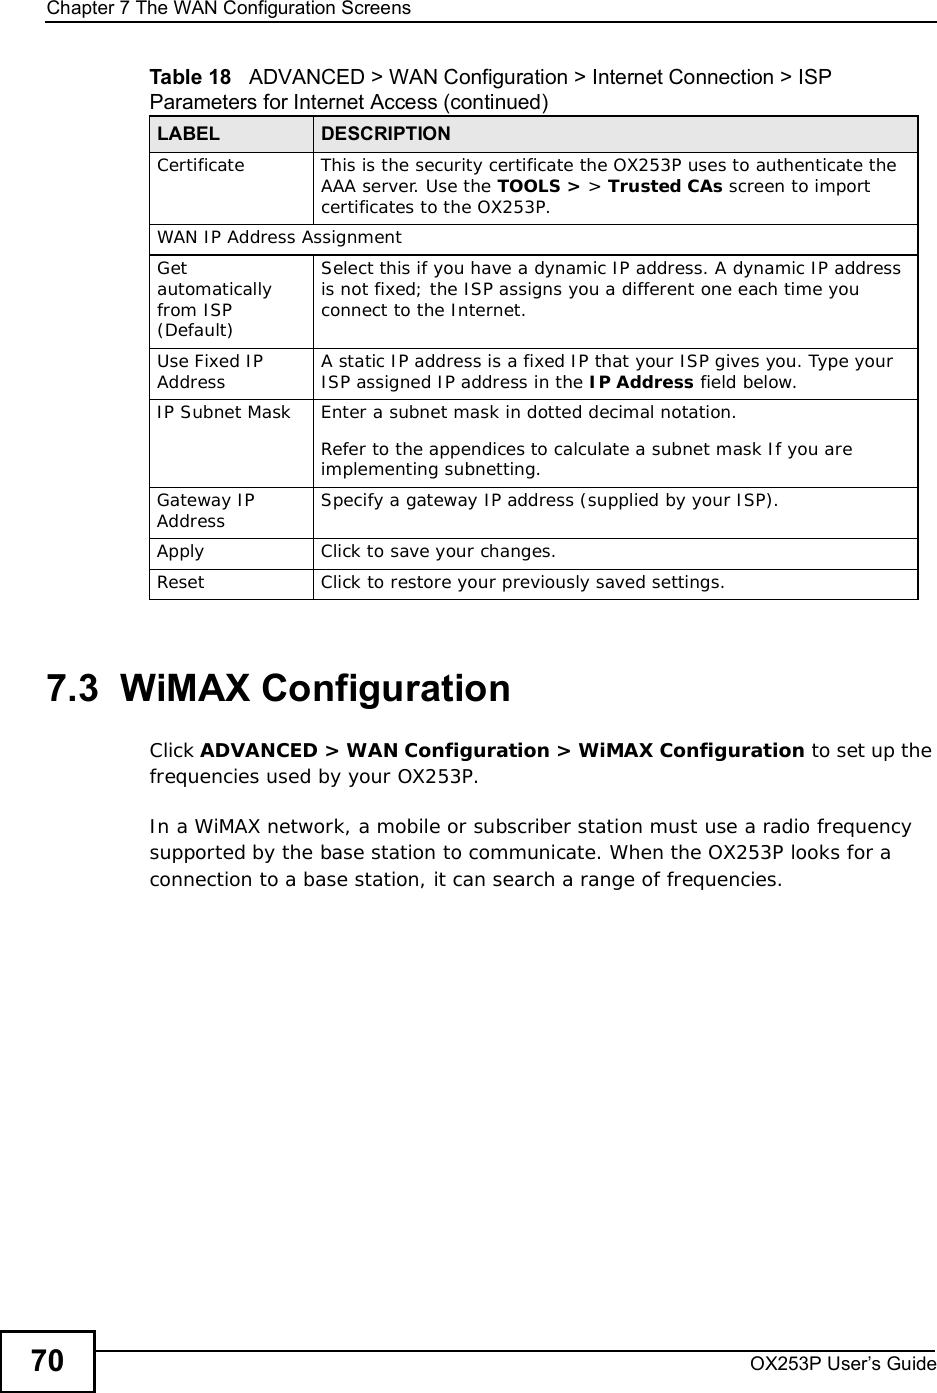 Chapter 7The WAN Configuration ScreensOX253P User’s Guide707.3  WiMAX ConfigurationClick ADVANCED &gt; WAN Configuration &gt; WiMAX Configuration to set up the frequencies used by your OX253P.In a WiMAX network, a mobile or subscriber station must use a radio frequency supported by the base station to communicate. When the OX253P looks for a connection to a base station, it can search a range of frequencies.CertificateThis is the security certificate the OX253P uses to authenticate the AAA server. Use the TOOLS &gt; &gt; Trusted CAs screen to import certificates to the OX253P.WAN IP Address AssignmentGetautomatically from ISP (Default)Select this if you have a dynamic IP address. A dynamic IP address is not fixed; the ISP assigns you a different one each time you connect to the Internet. Use Fixed IP Address A static IP address is a fixed IP that your ISP gives you. Type your ISP assigned IP address in the IP Address field below. IP Subnet MaskEnter a subnet mask in dotted decimal notation. Refer to the appendicesto calculate a subnet mask If you are implementing subnetting.Gateway IP Address Specify a gateway IP address (supplied by your ISP).ApplyClick to save your changes.ResetClick to restore your previously saved settings.Table 18   ADVANCED &gt; WAN Configuration &gt; Internet Connection &gt; ISP Parameters for Internet Access (continued)LABEL DESCRIPTION